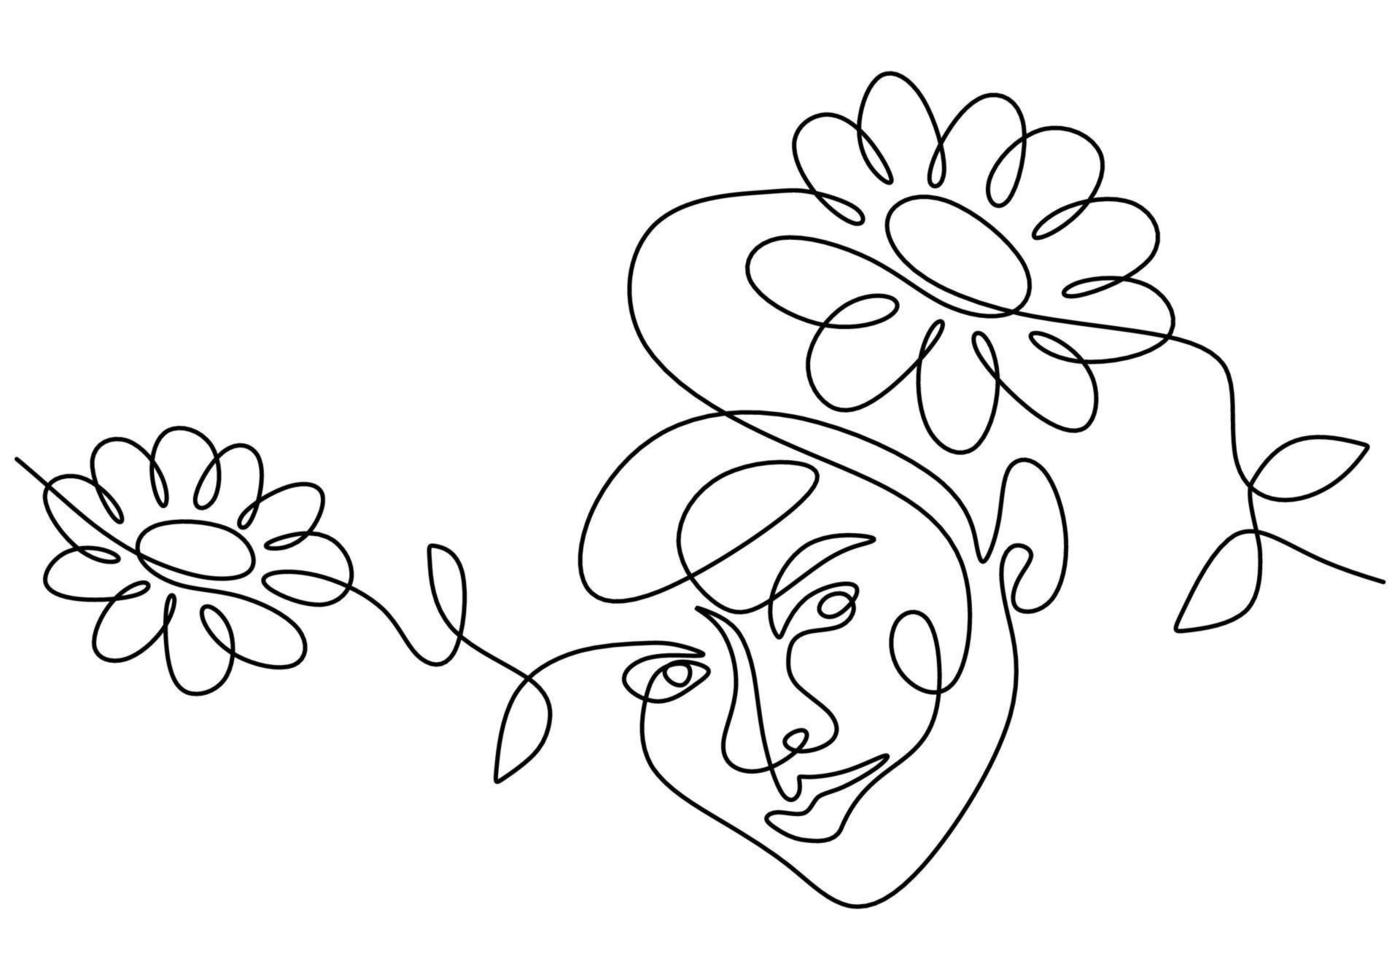 Hand drawing one line woman surreal face and flower vector